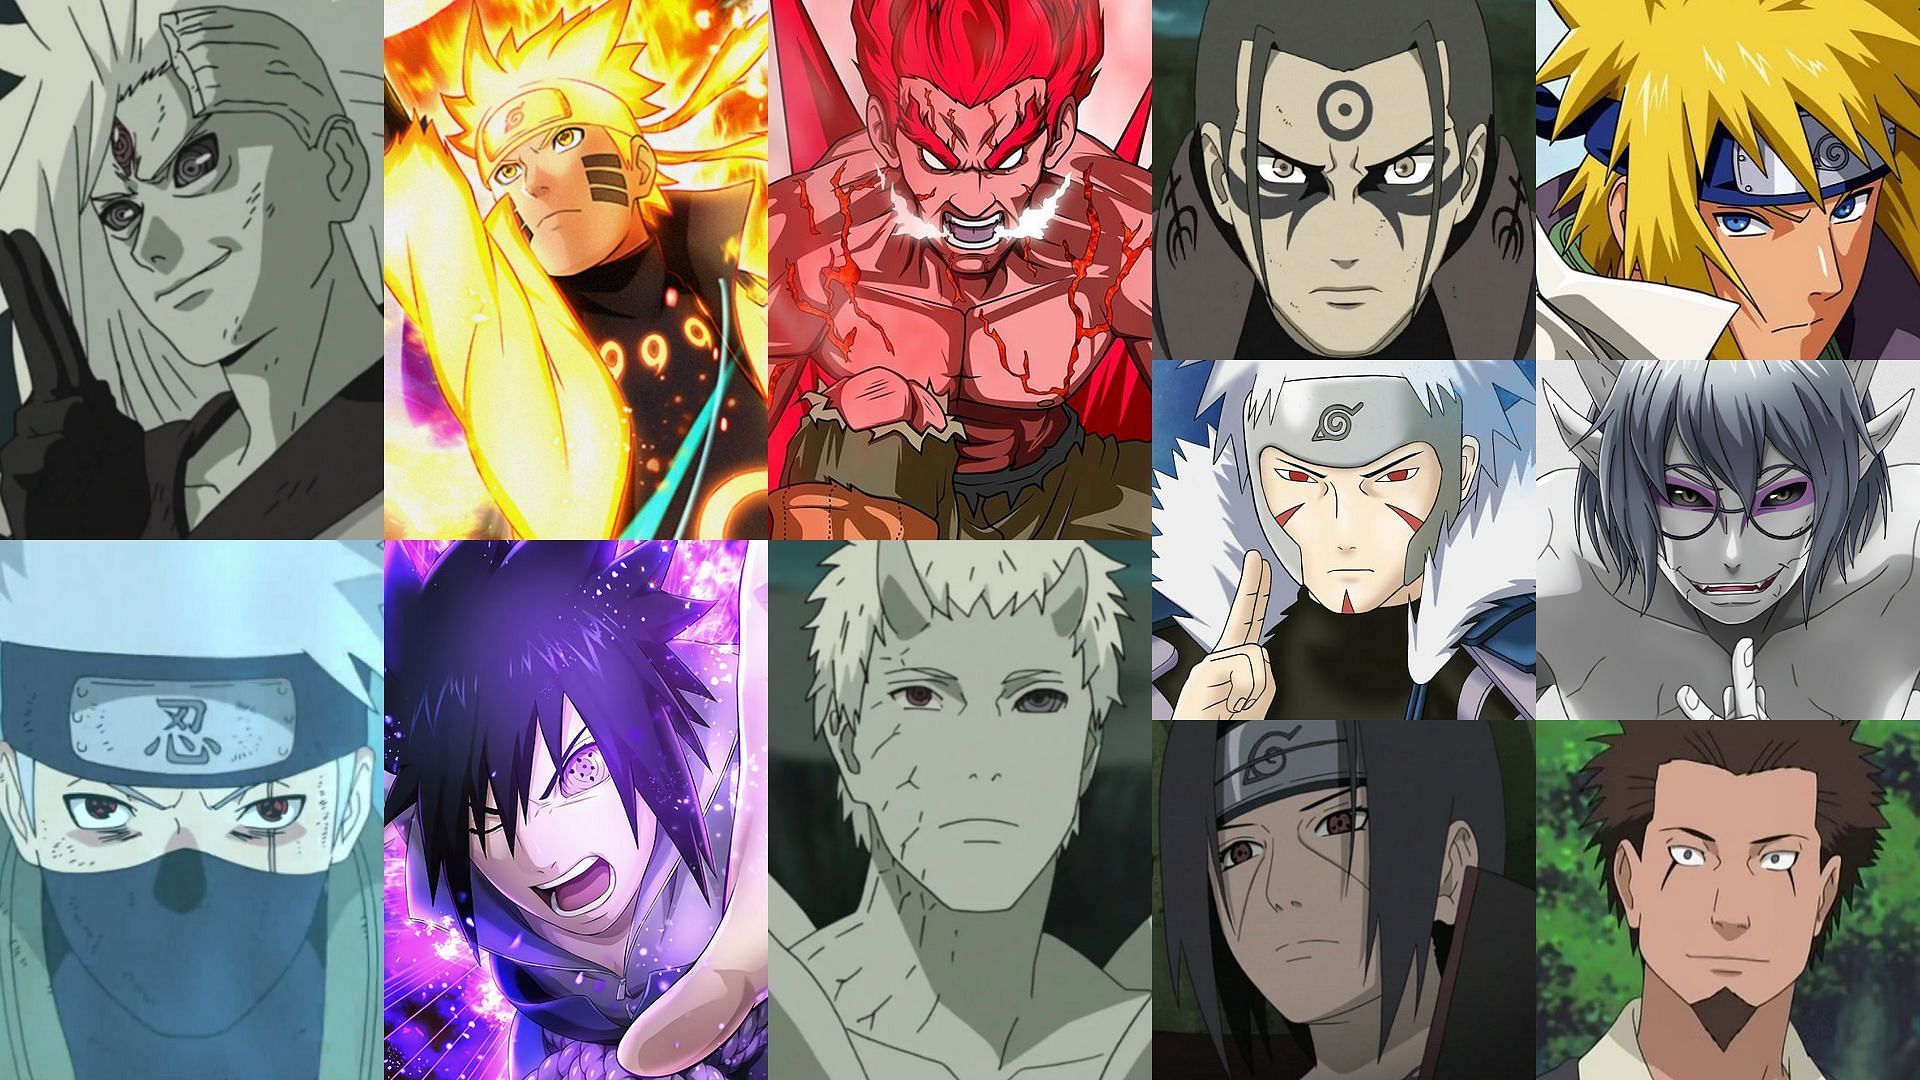 Konoha gave birth to some of the strongest characters in the Naruto series (Image via Studio Pierrot, Naruto)